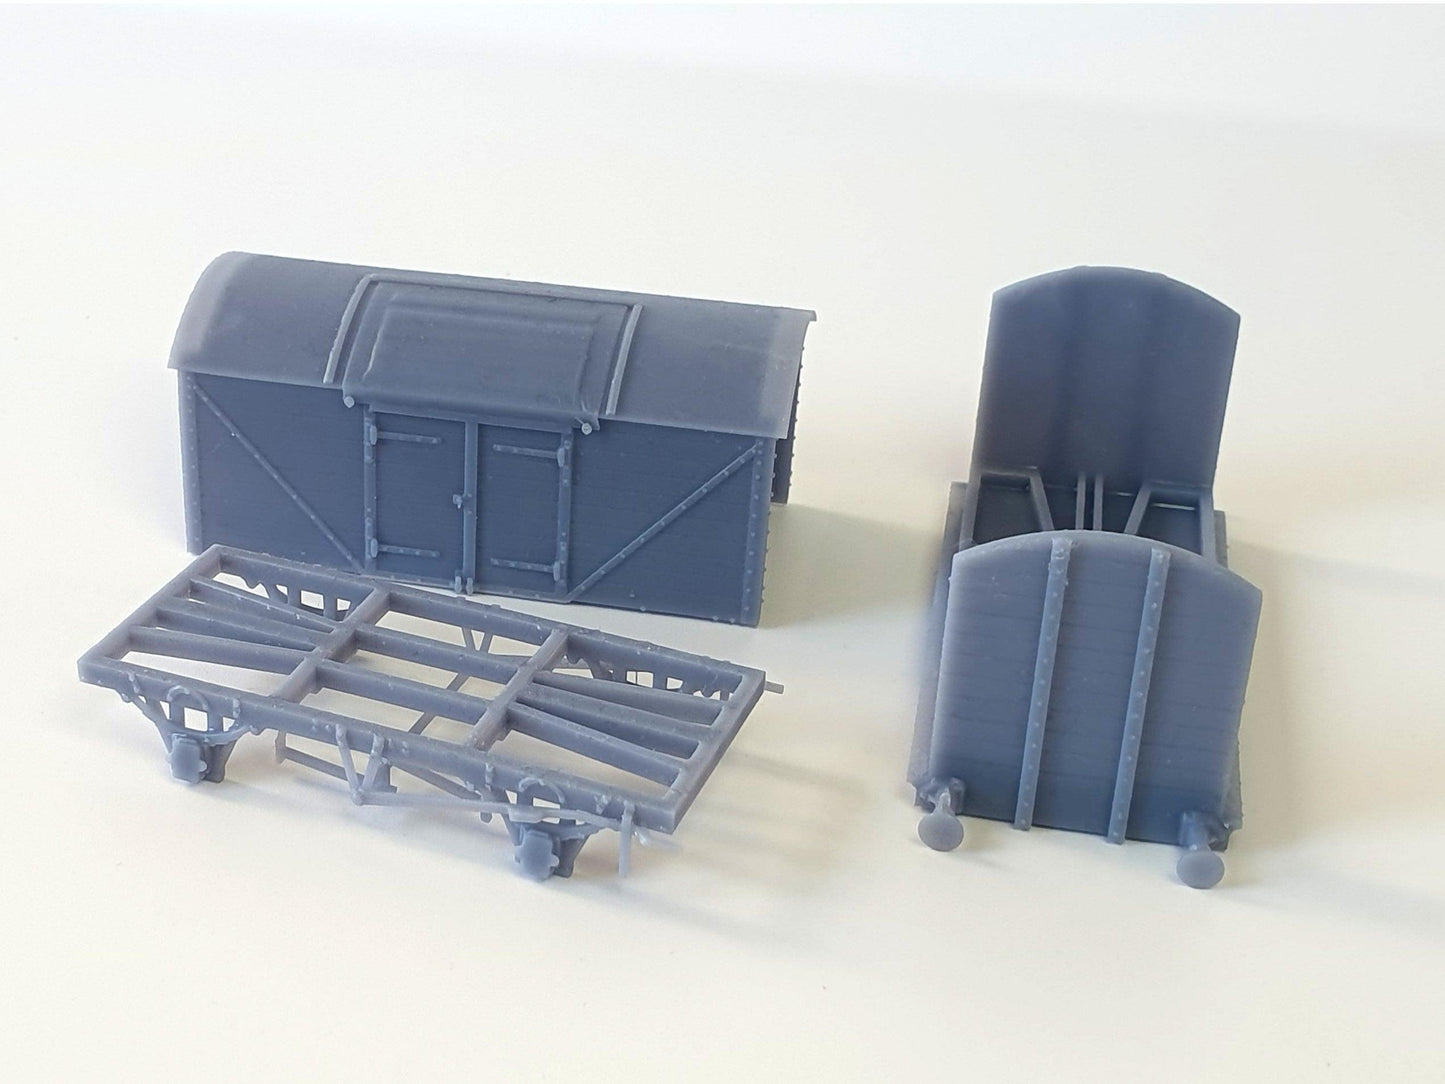 Kit of parts for a OO (1:76) scale model of an L&Y Diagram 3 Covered Goods wagon - Three Peaks Models